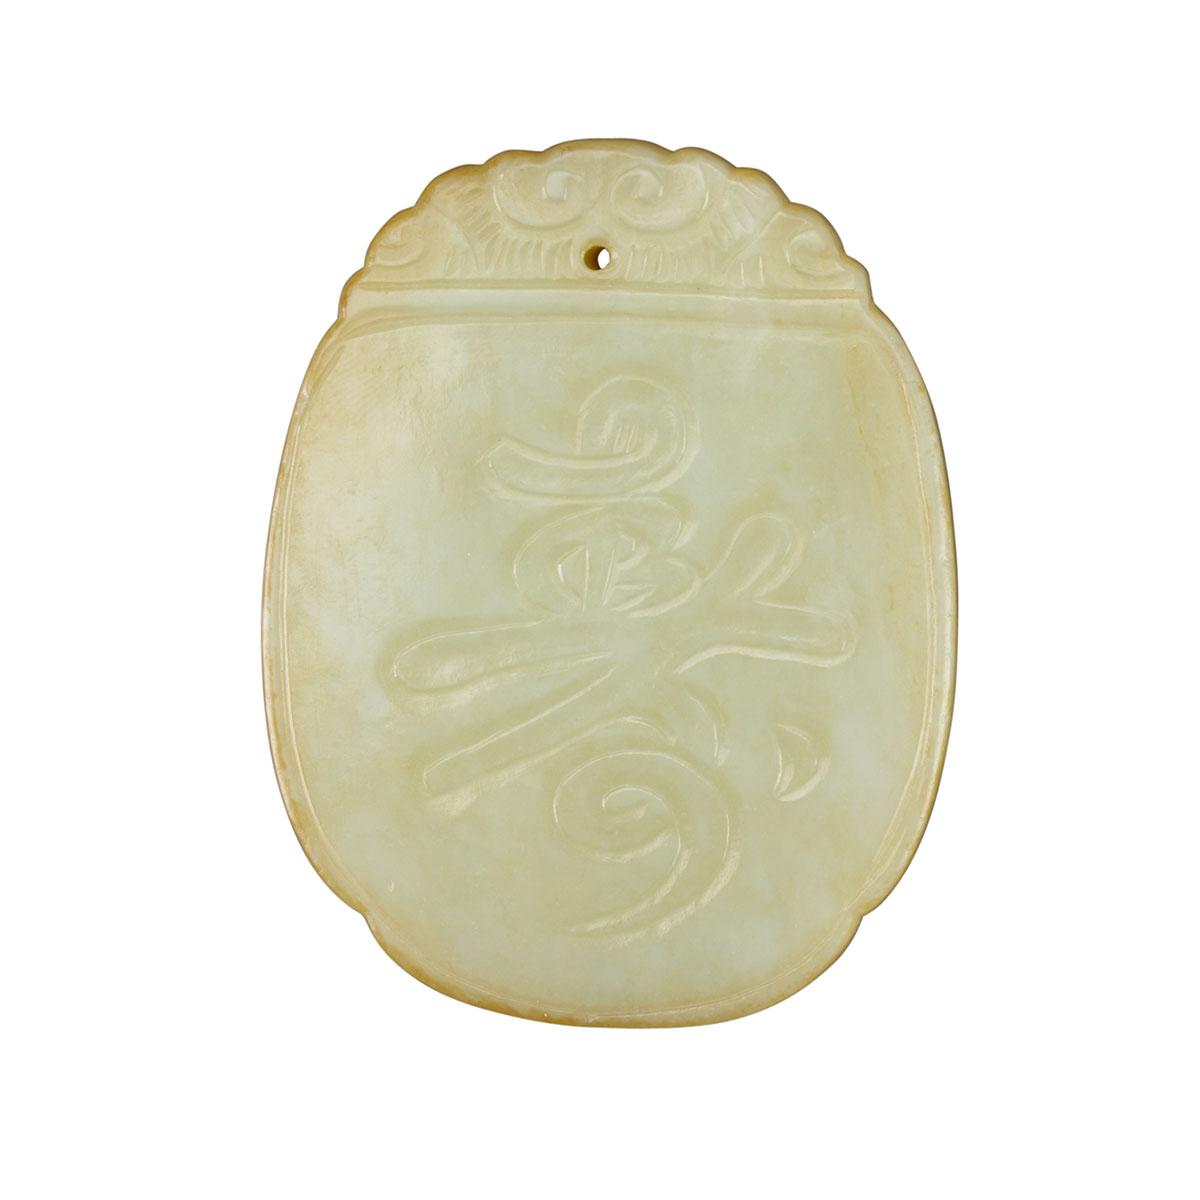 Celadon Jade Plaque, Late Qing Dynasty